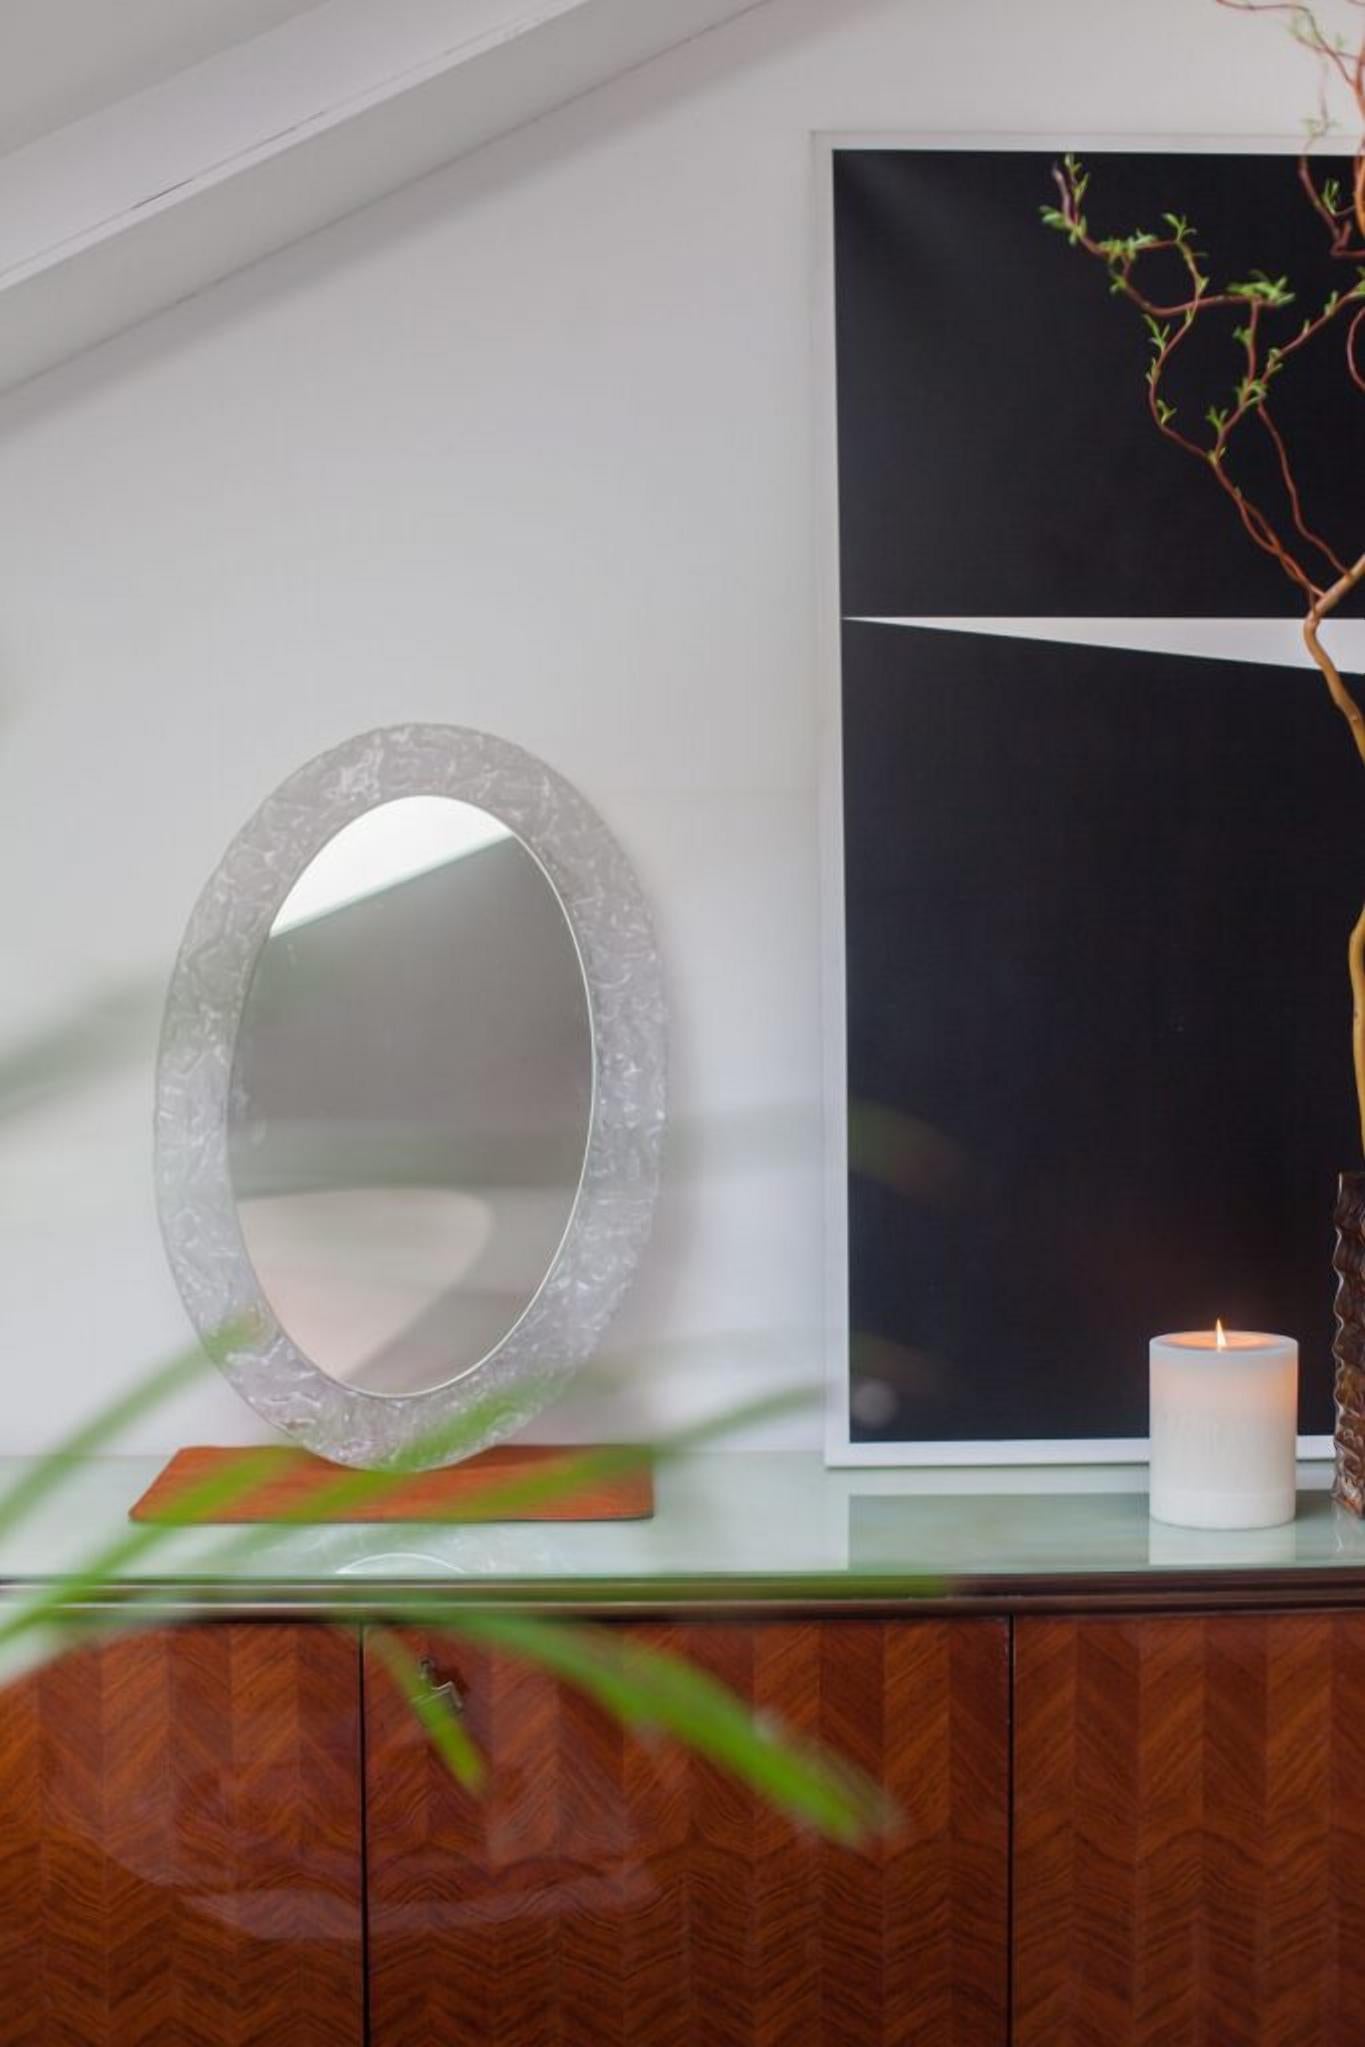 Oval wall mirror, with frame in transparent textured Lucite.

This wall mounted Lucite mirror is truly a statement piece that adds both visual interest and functionality to any room, showcasing the creativity and quality craftsmanship of the